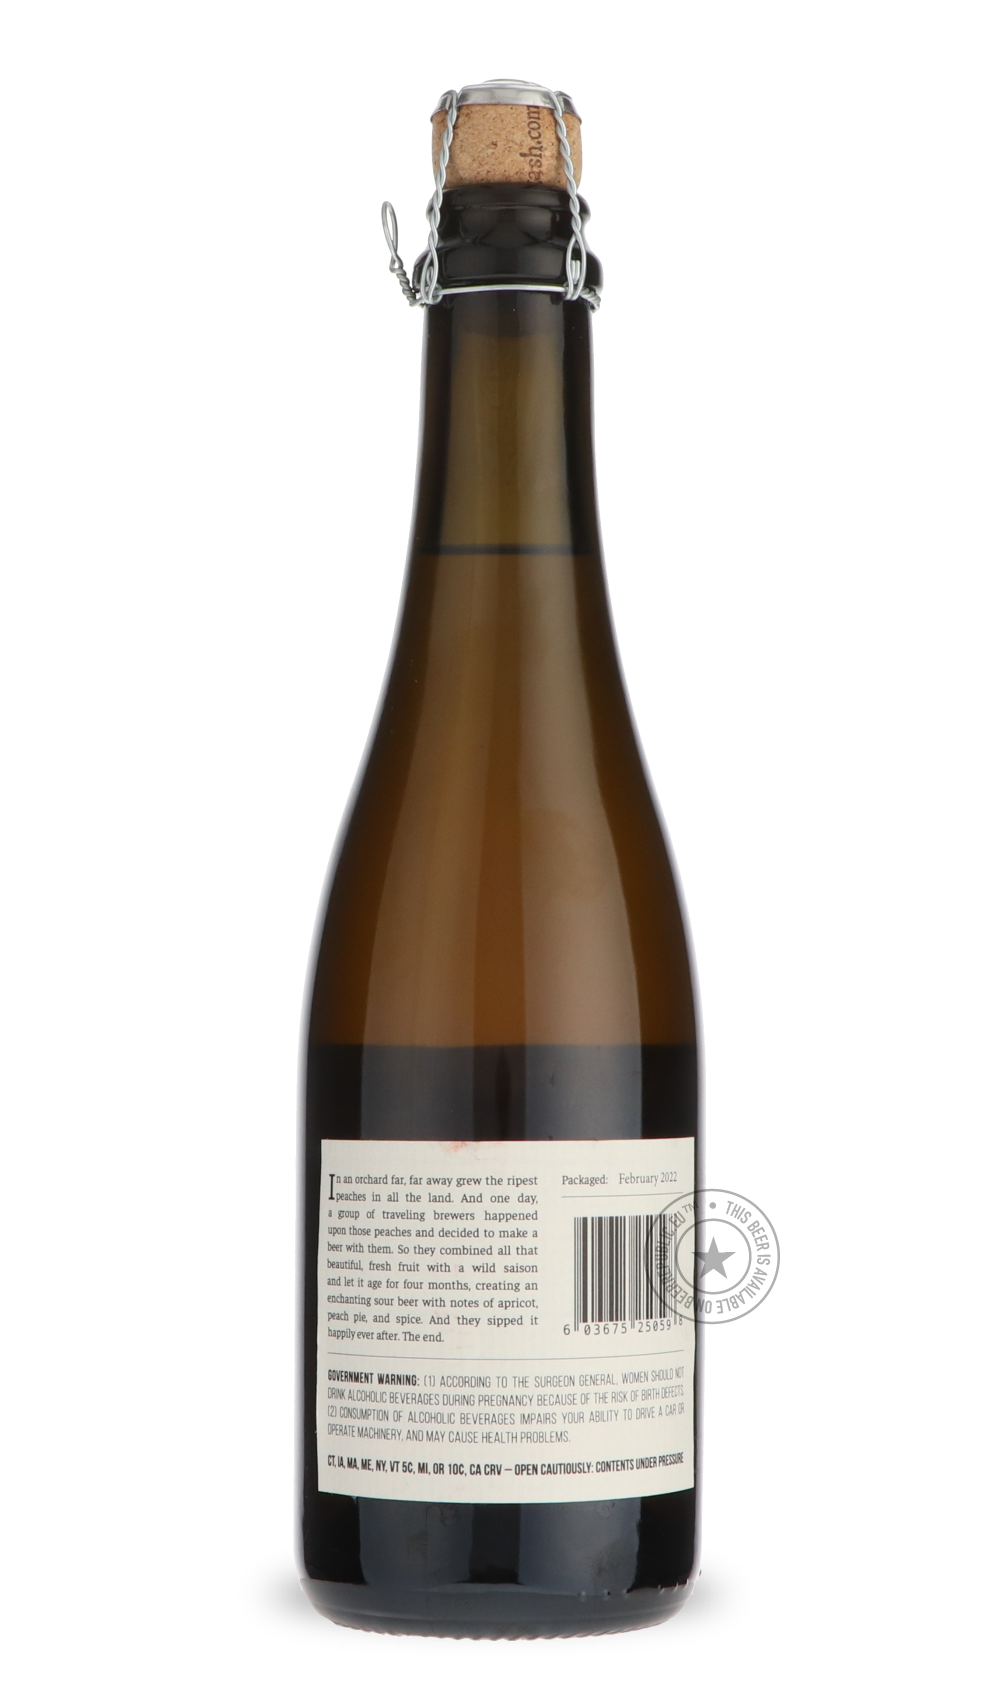 -Allagash- Once Upon An Orchard - Peach-Sour / Wild & Fruity- Only @ Beer Republic - The best online beer store for American & Canadian craft beer - Buy beer online from the USA and Canada - Bier online kopen - Amerikaans bier kopen - Craft beer store - Craft beer kopen - Amerikanisch bier kaufen - Bier online kaufen - Acheter biere online - IPA - Stout - Porter - New England IPA - Hazy IPA - Imperial Stout - Barrel Aged - Barrel Aged Imperial Stout - Brown - Dark beer - Blond - Blonde - Pilsner - Lager - W